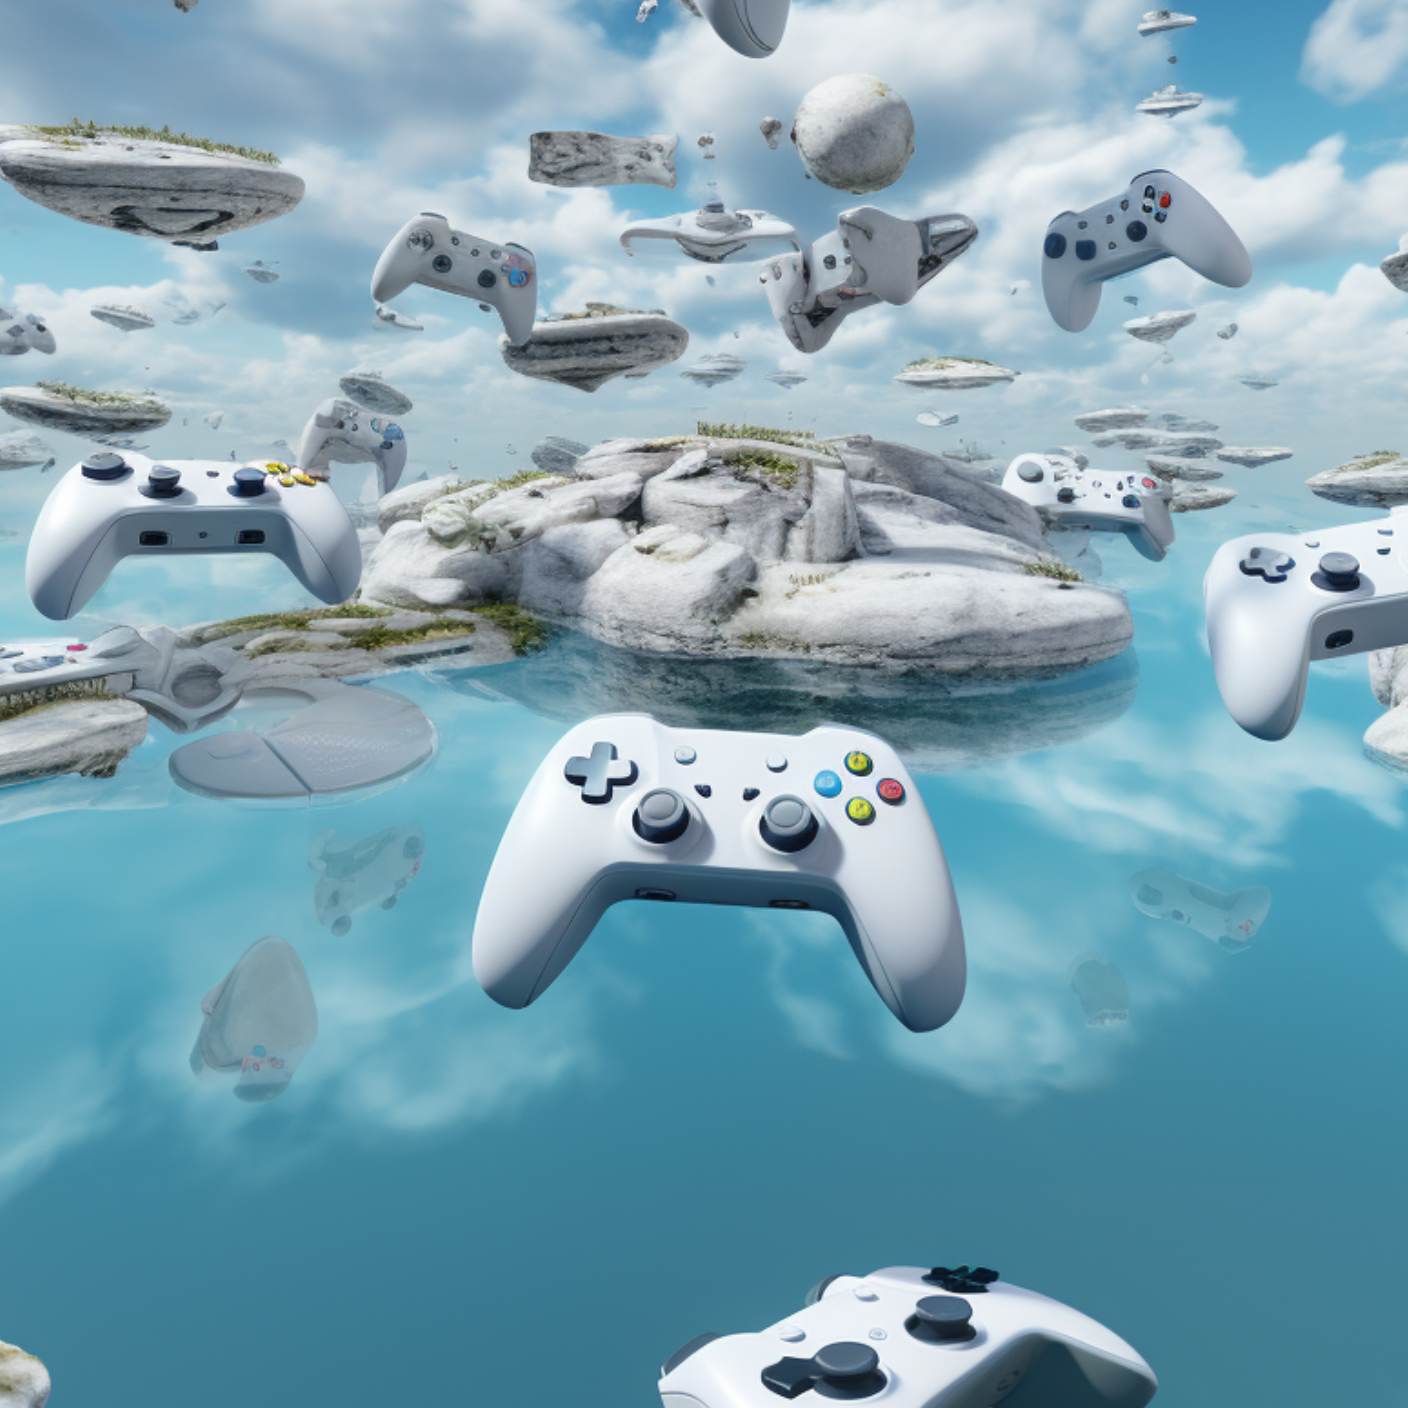 Game controllers in a 3D world.